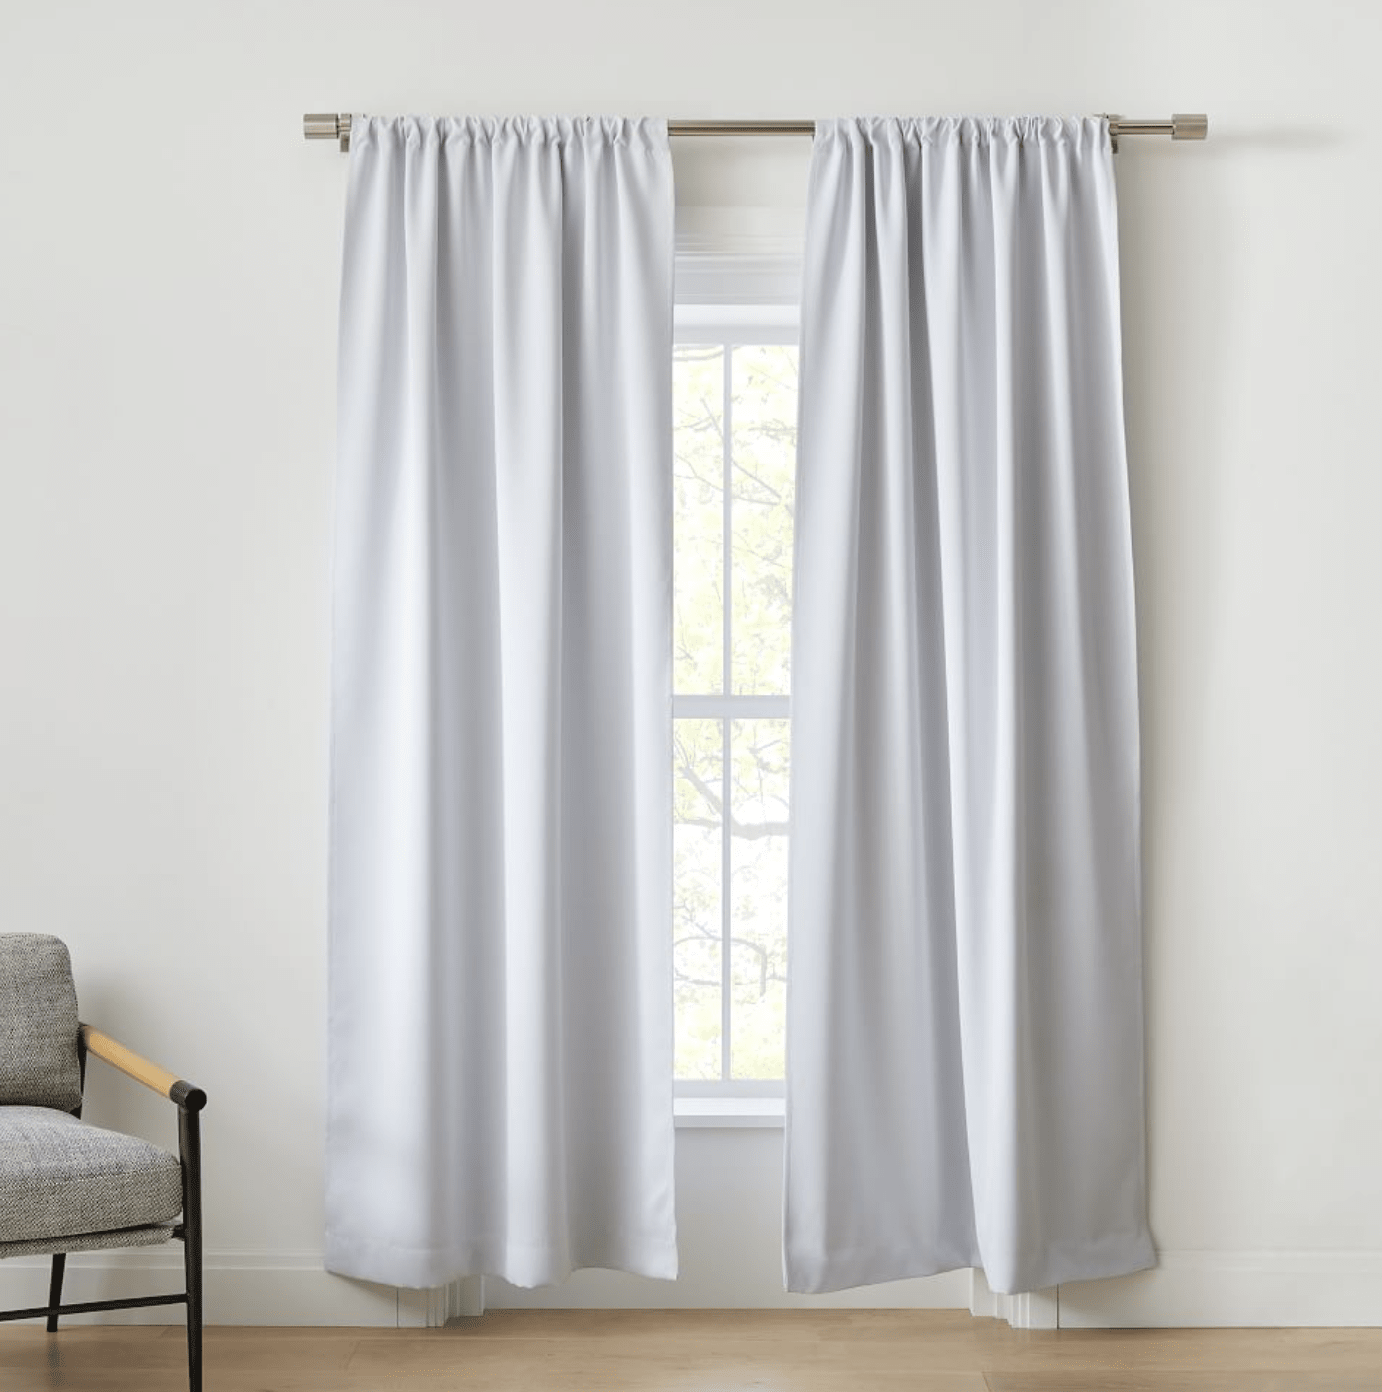 Hotel Quality Blackout Curtains, save money on heating, electric cost,  sleep better, block out light, block out street sound, Our blackout curtains  offer total light control